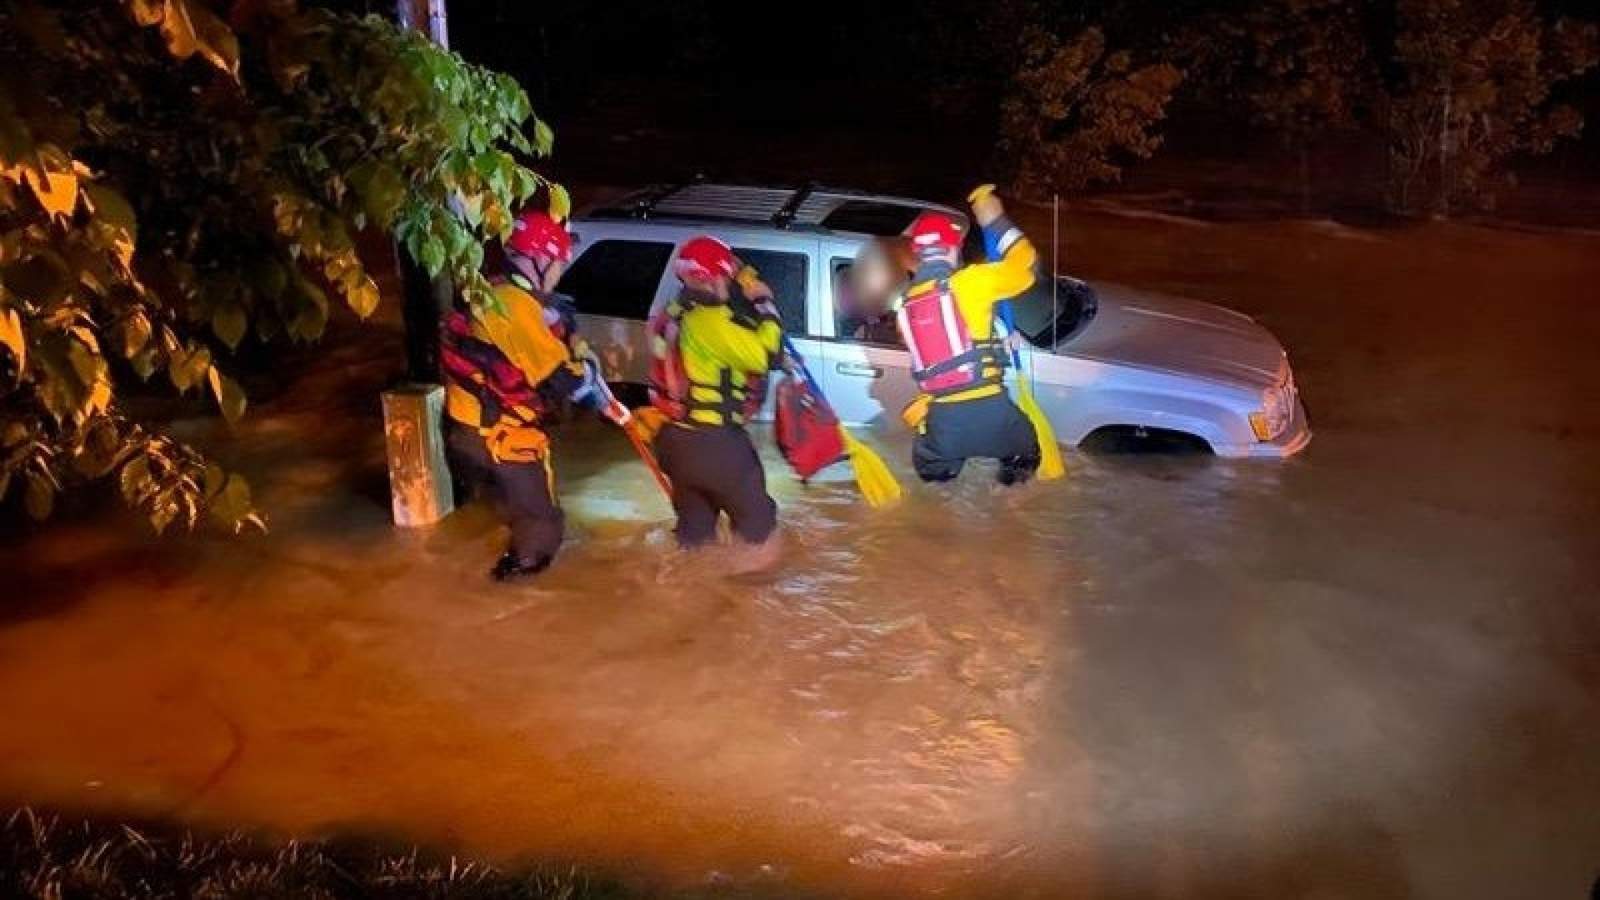 Crews respond to three swift-water rescues in Roanoke